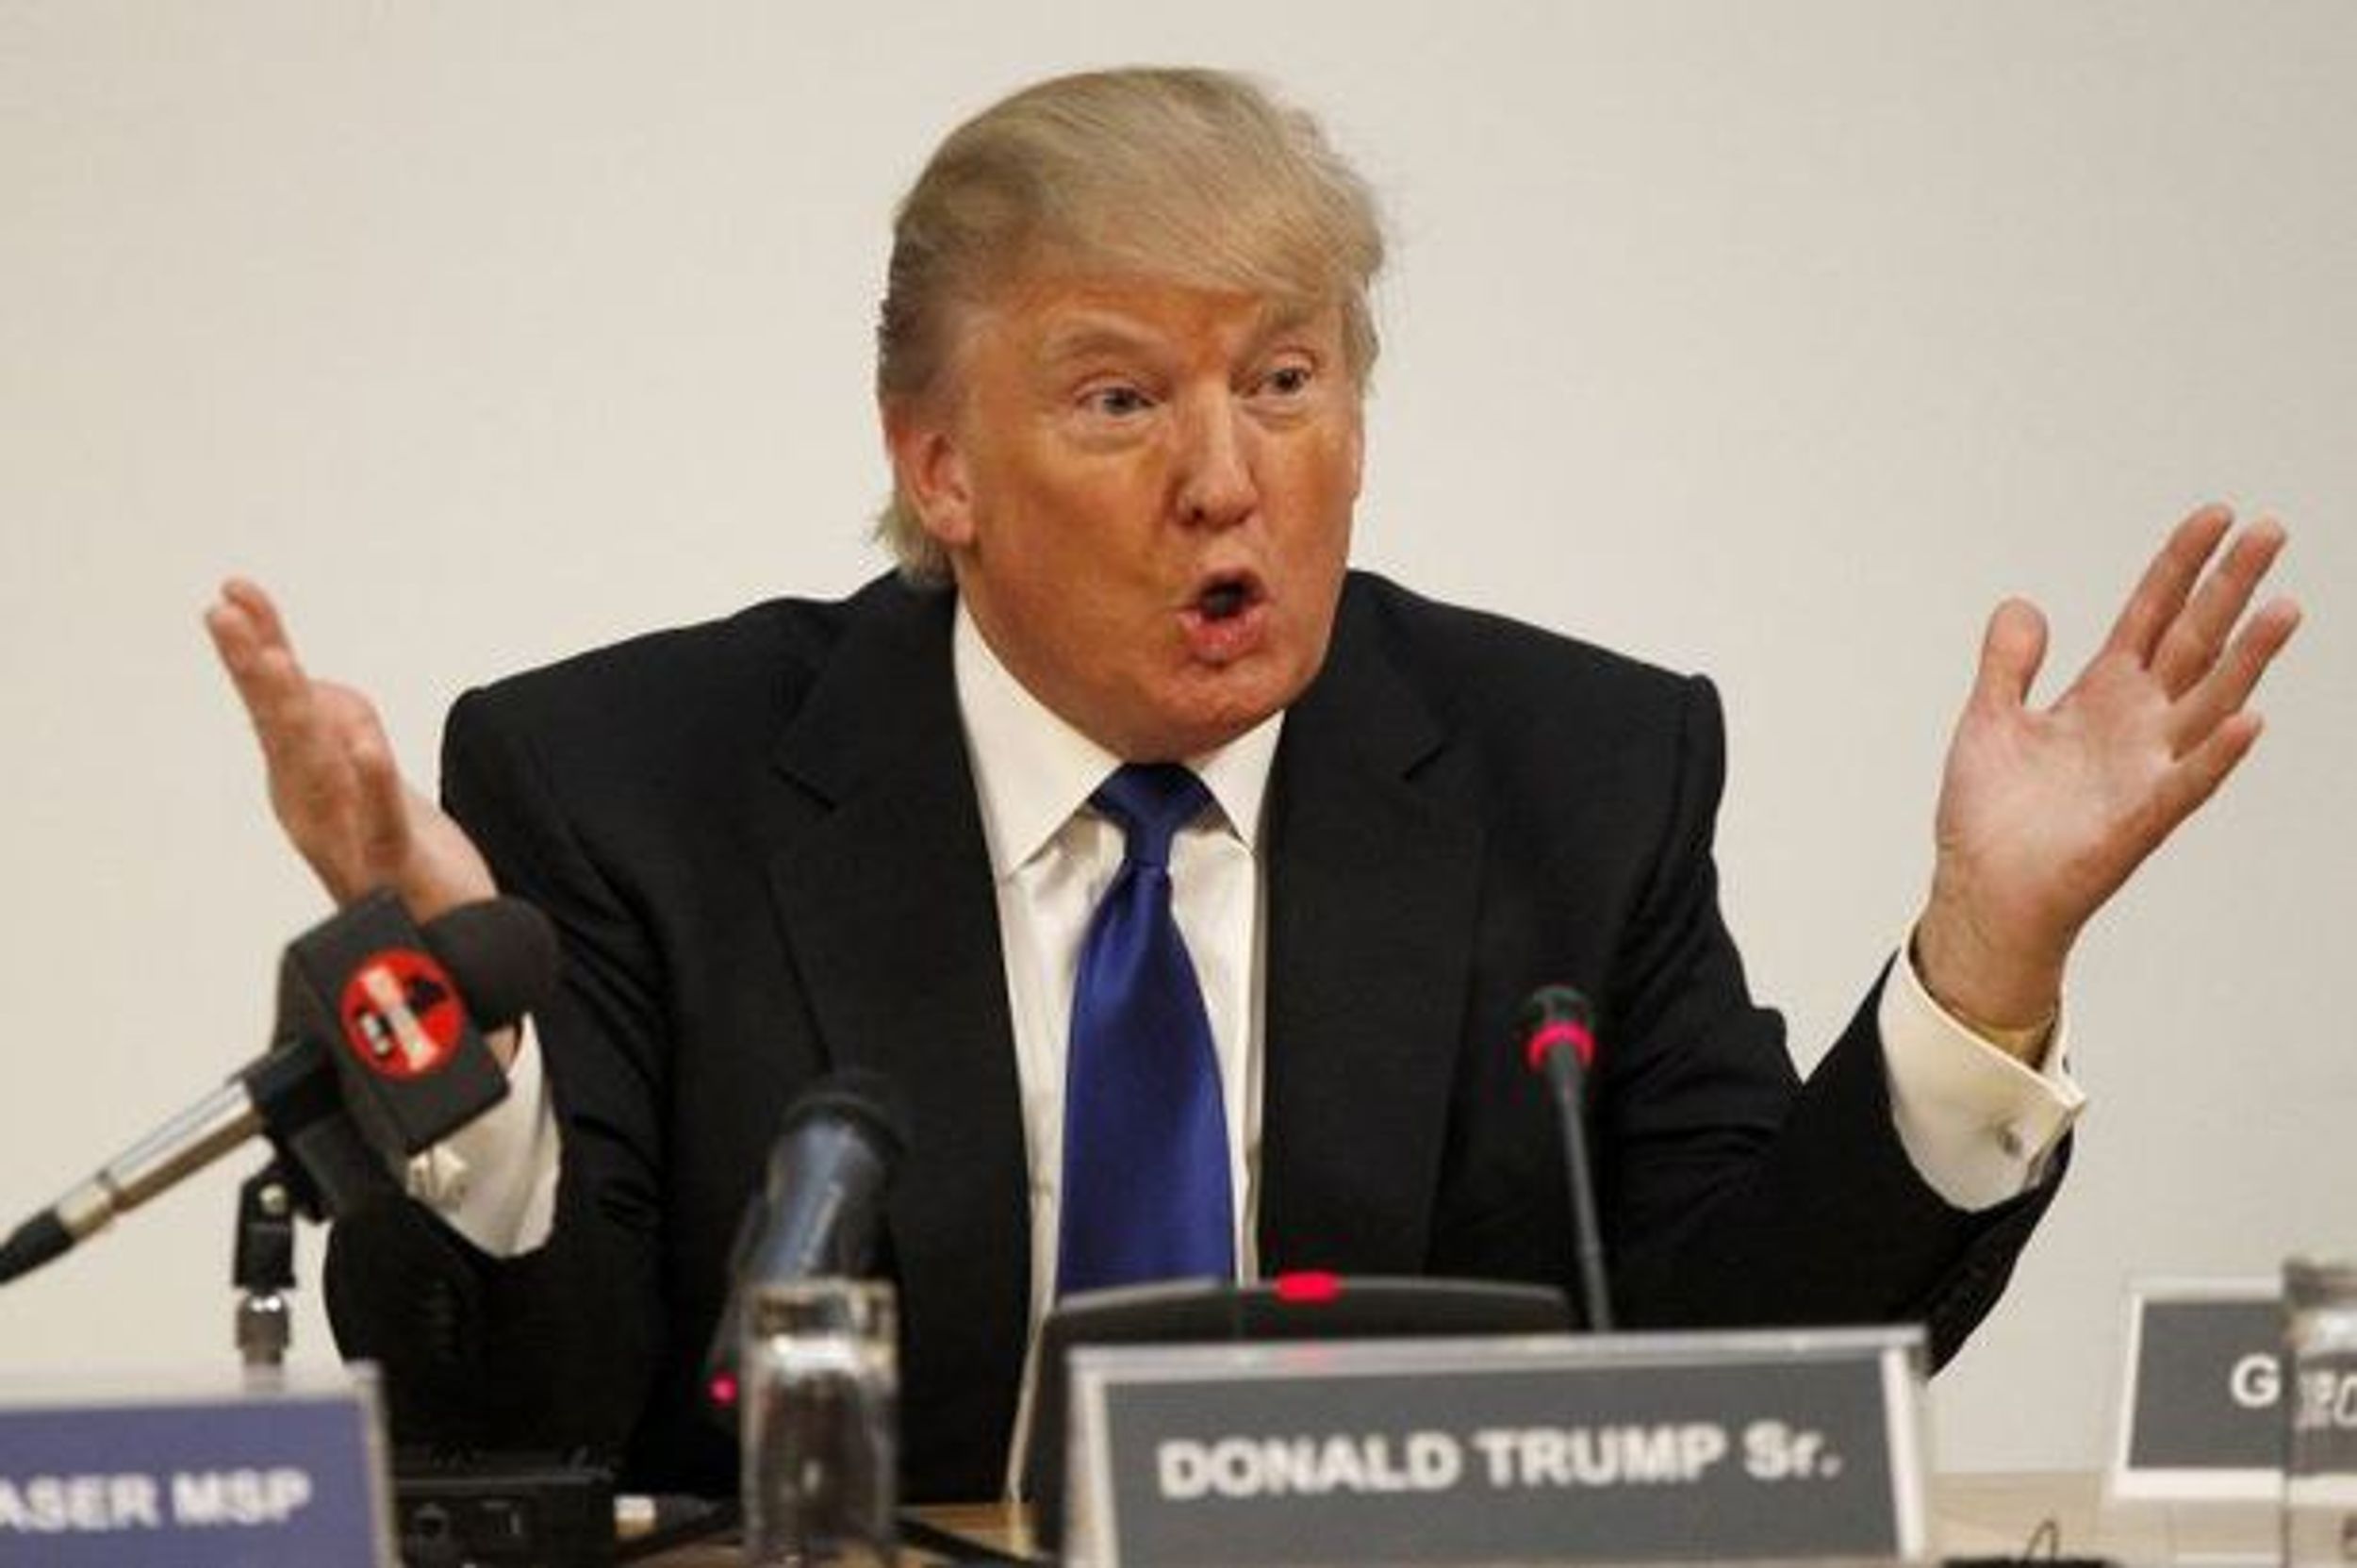 7 Times Donald Trump Sued Or Threatened To Sue For Stupid Reasons